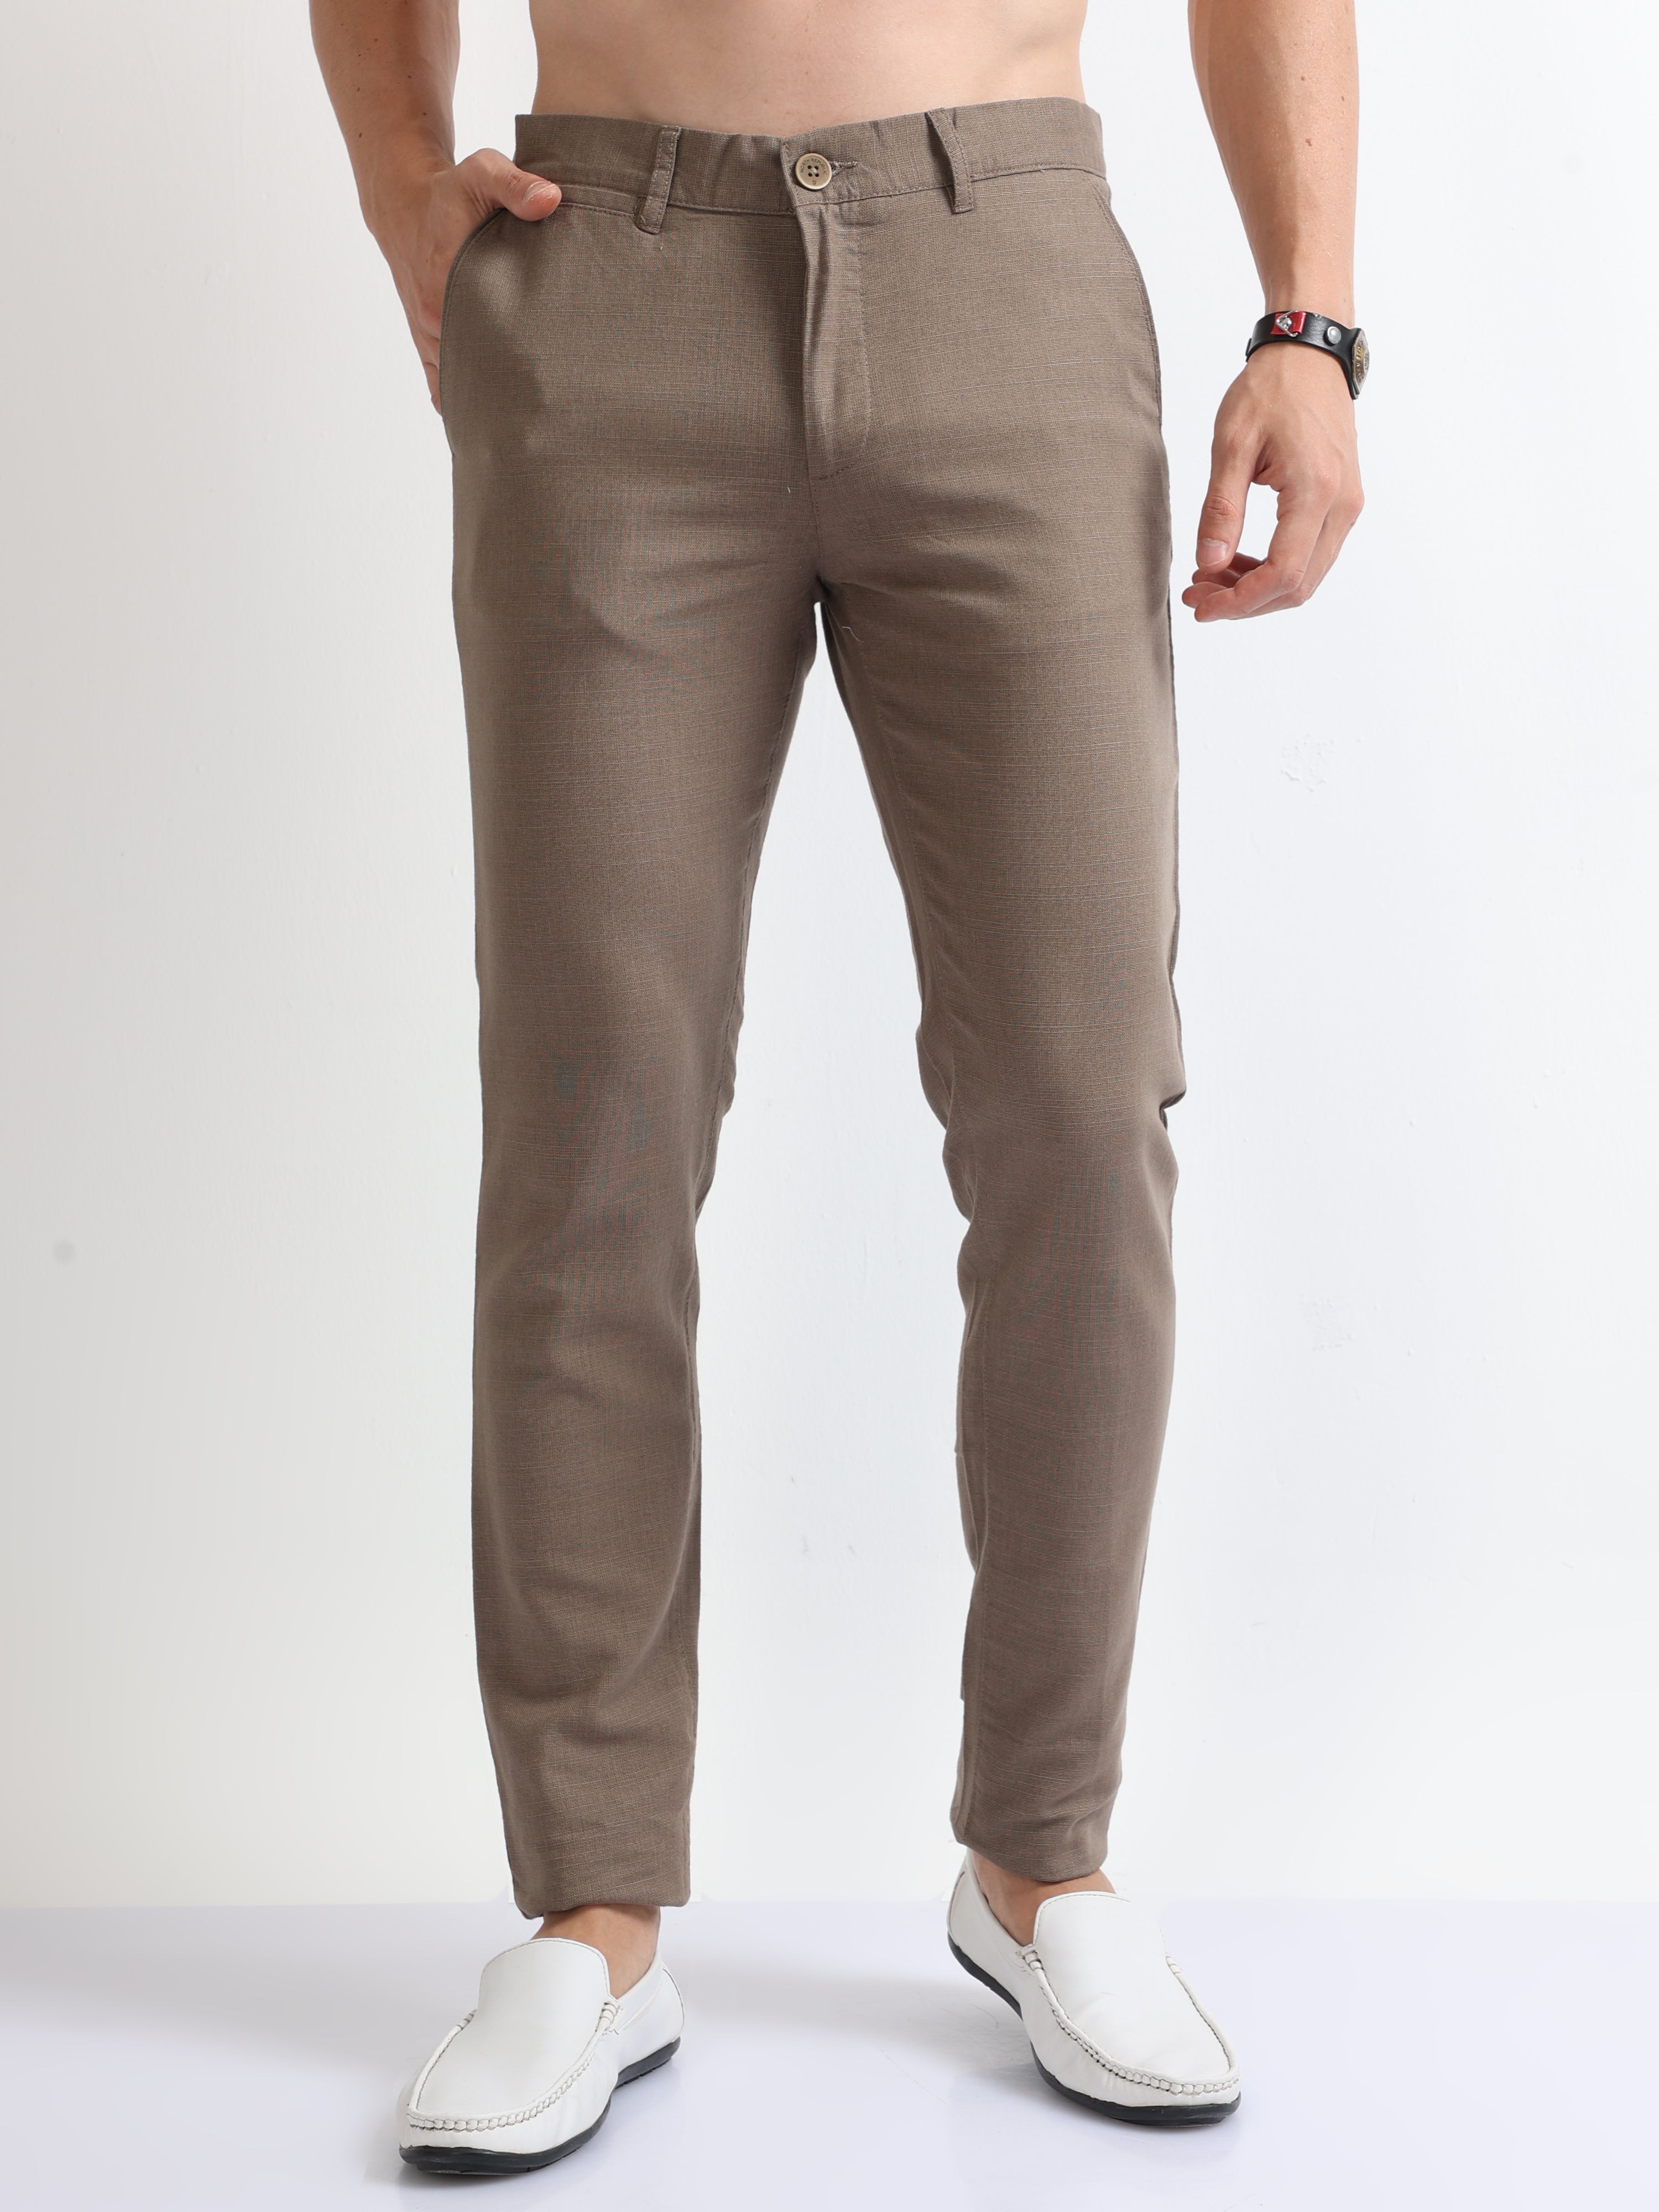 Brown Pants Outfits: 18 Examples & The Colours That Go Best